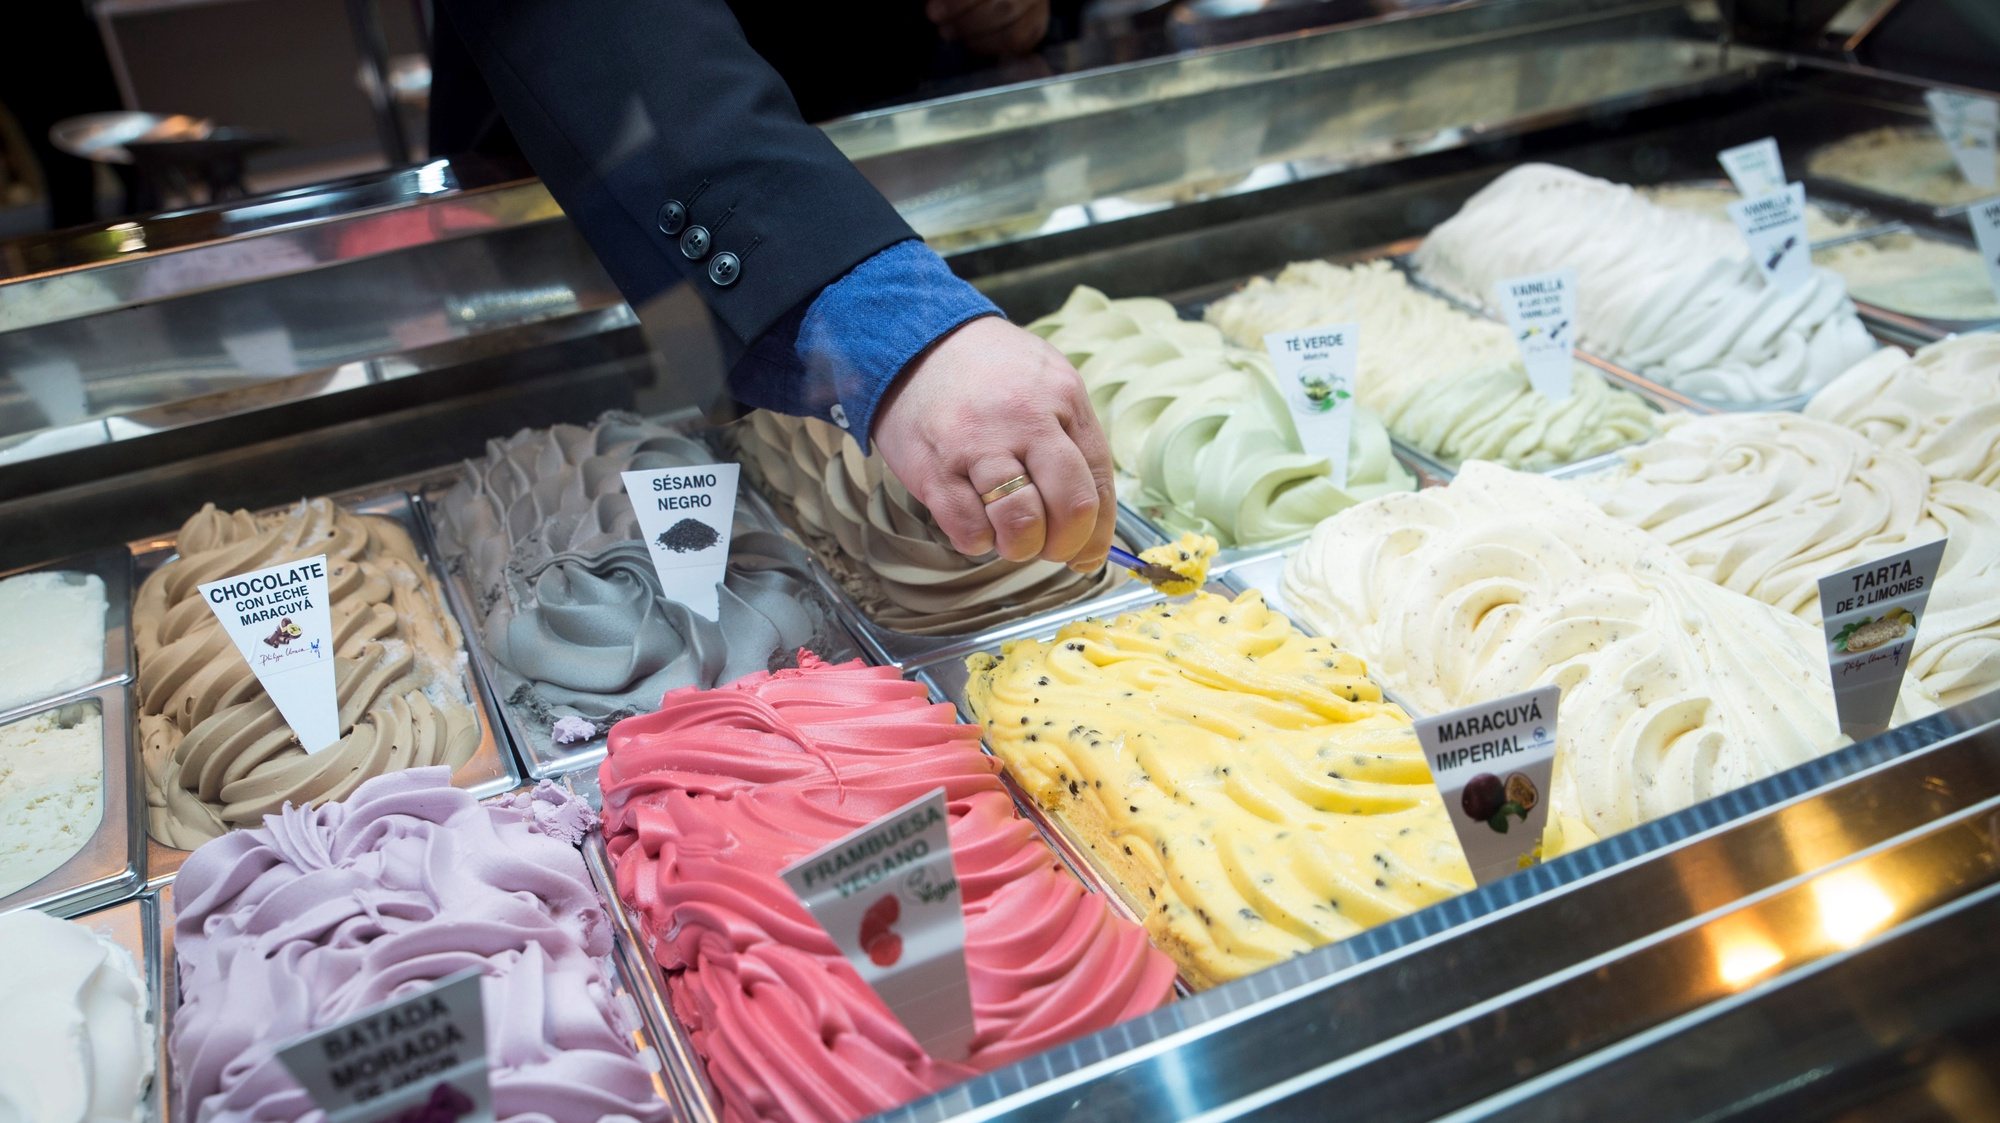 epa07491914 A view of several gourmet ice-creams as part of 33th Gourmet Fair in Madrid, Spain, 08 April 2019. The fair is held in the framework of International Quality Food and Drinks Trade Show.  EPA/Luca Piergiovanni